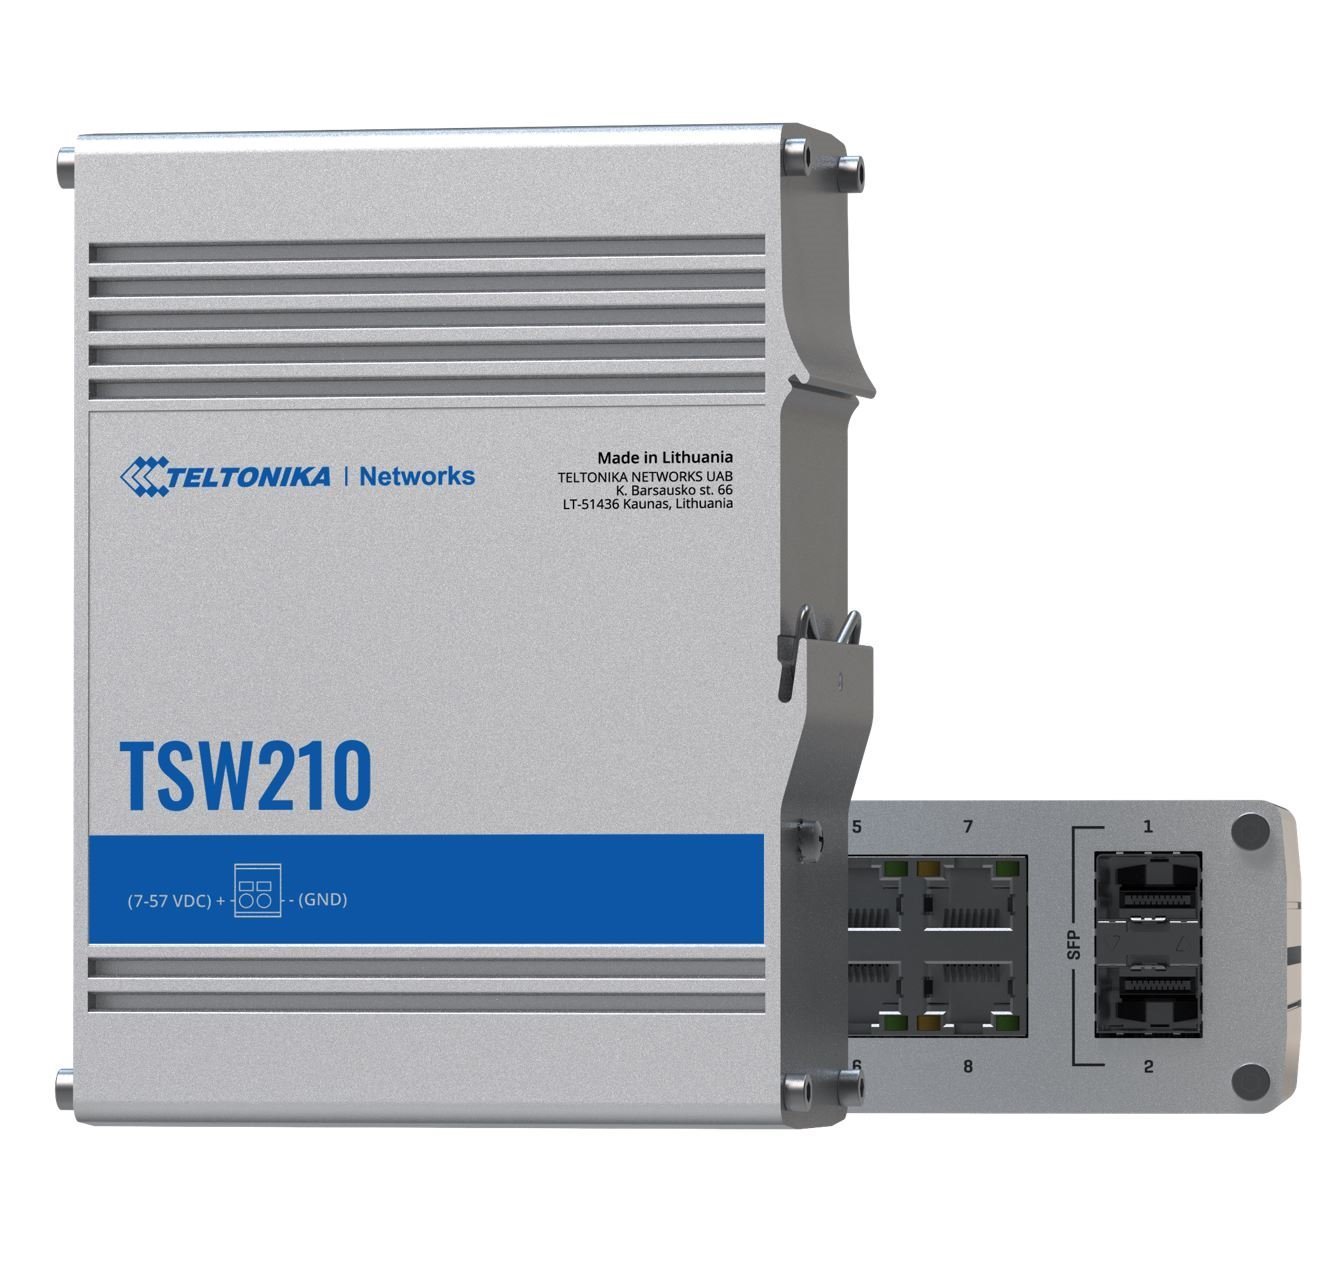 Teltonika TSW210 - The Industrial Grade Switch From Teltonika Networks With Eight Gigabit Ethernet And Two SFP Ports. (TSW210 + Pr5mec25 )